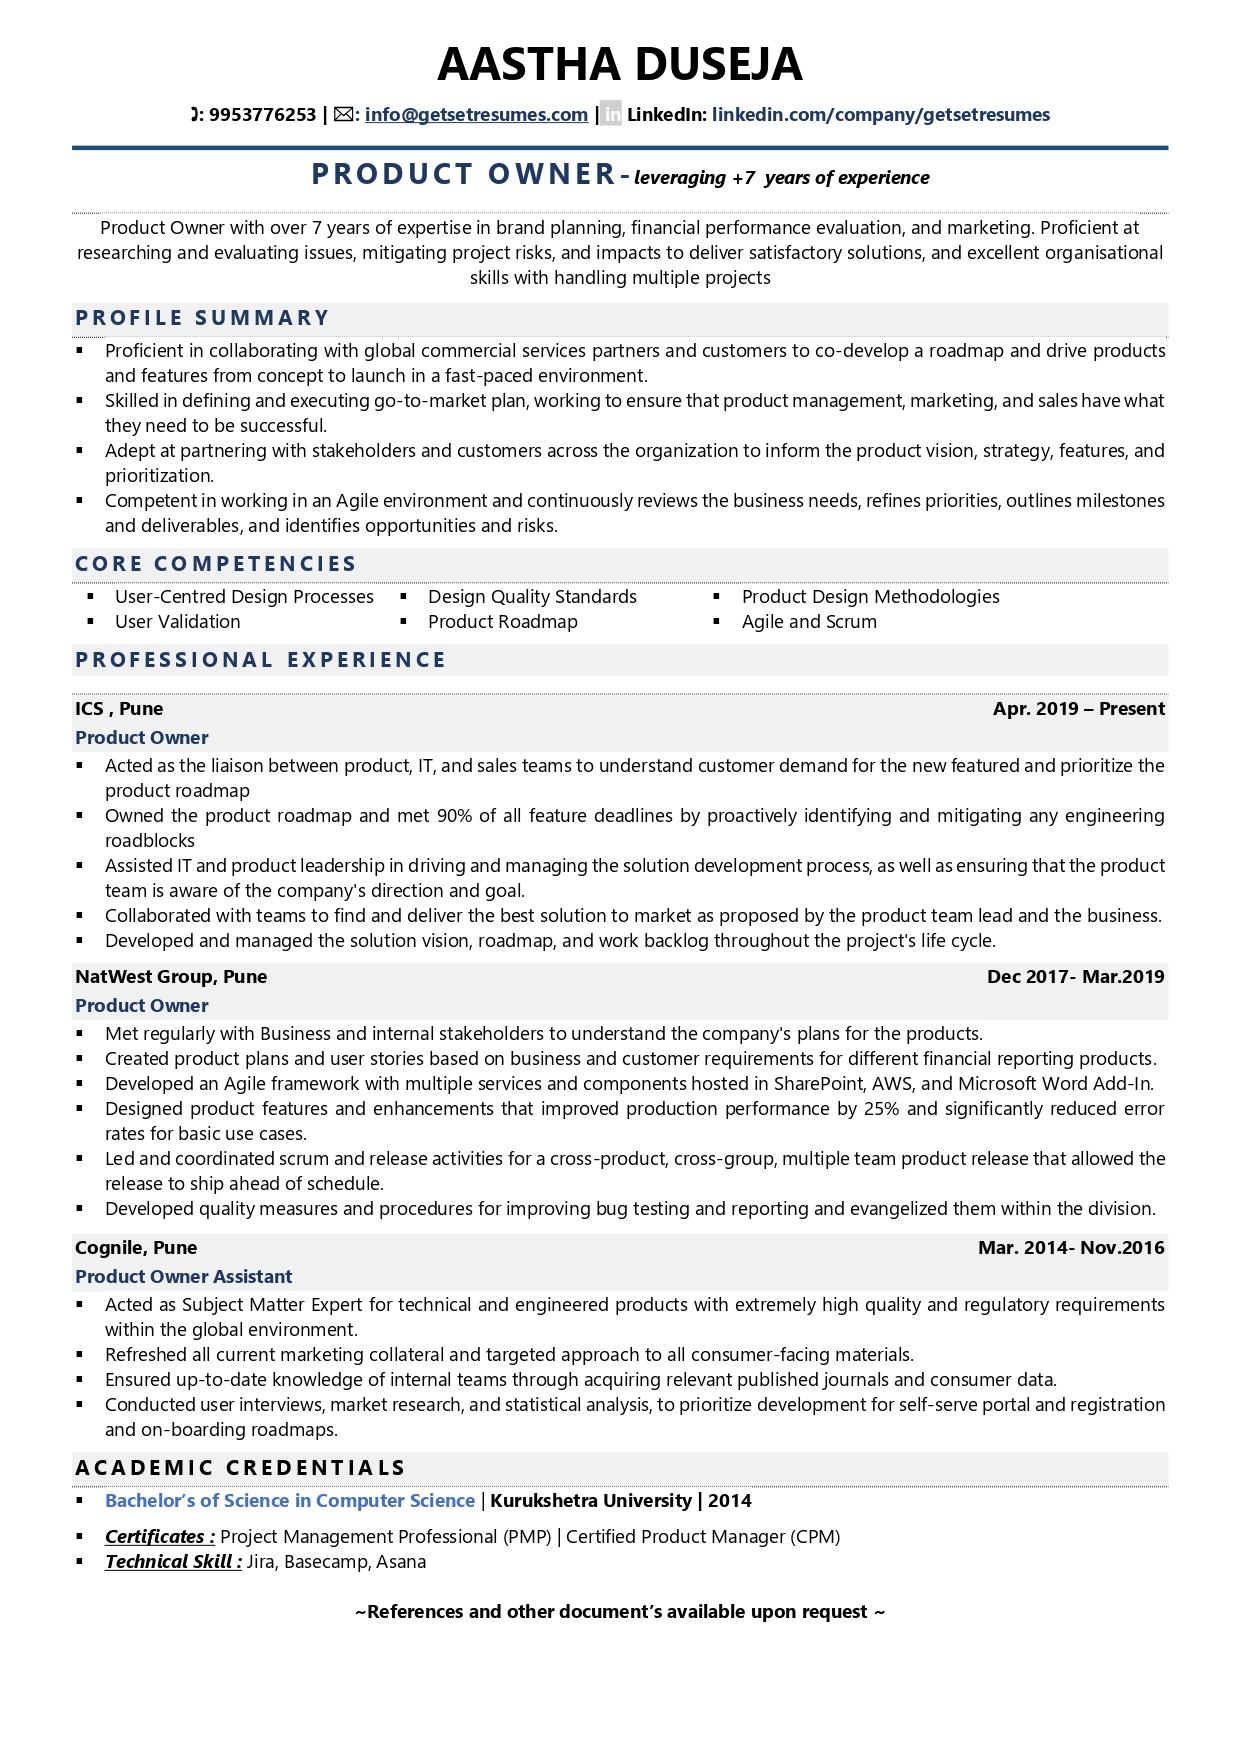 Product Owner - Resume Example & Template